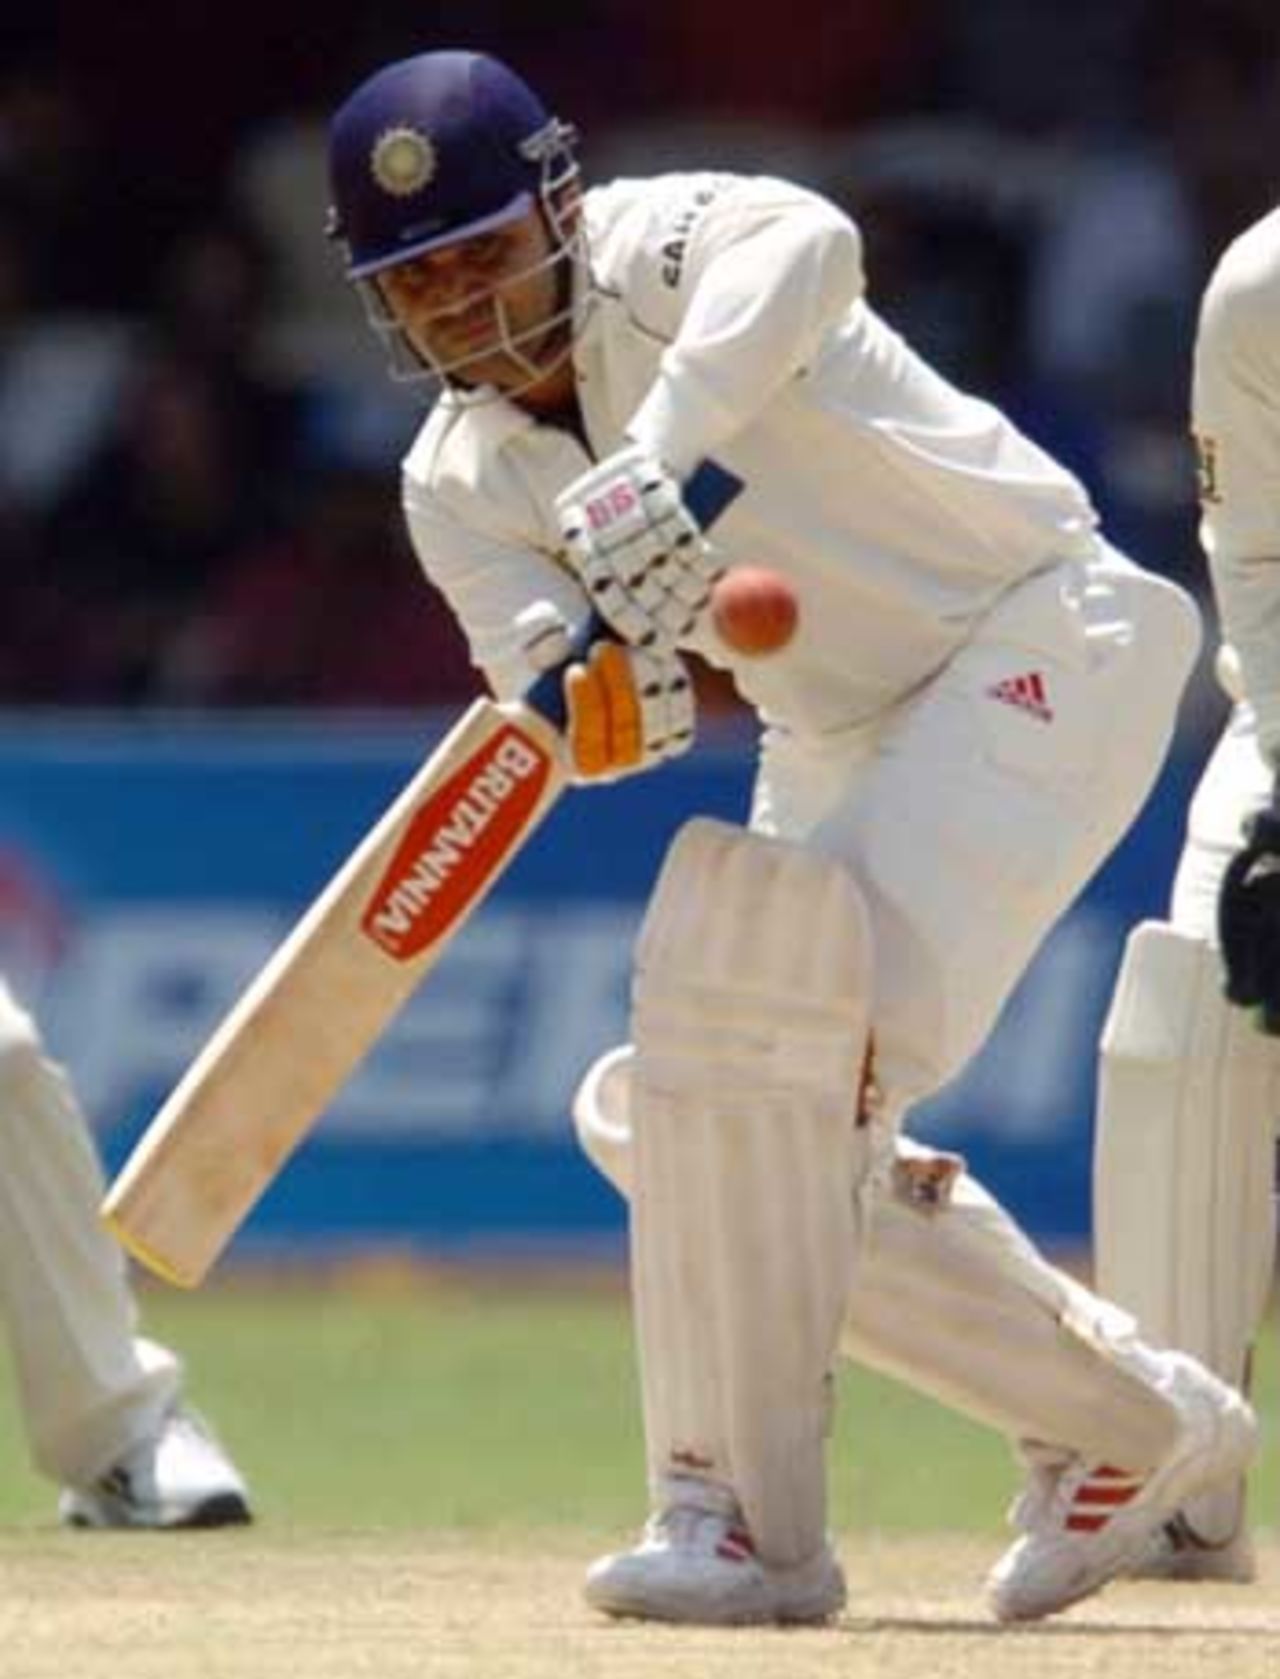 Virender Sehwag continued from where he left off, striking the ball cleanly, India v Pakistan, 3rd Test, Bangalore, 3rd day, March 24, 2005